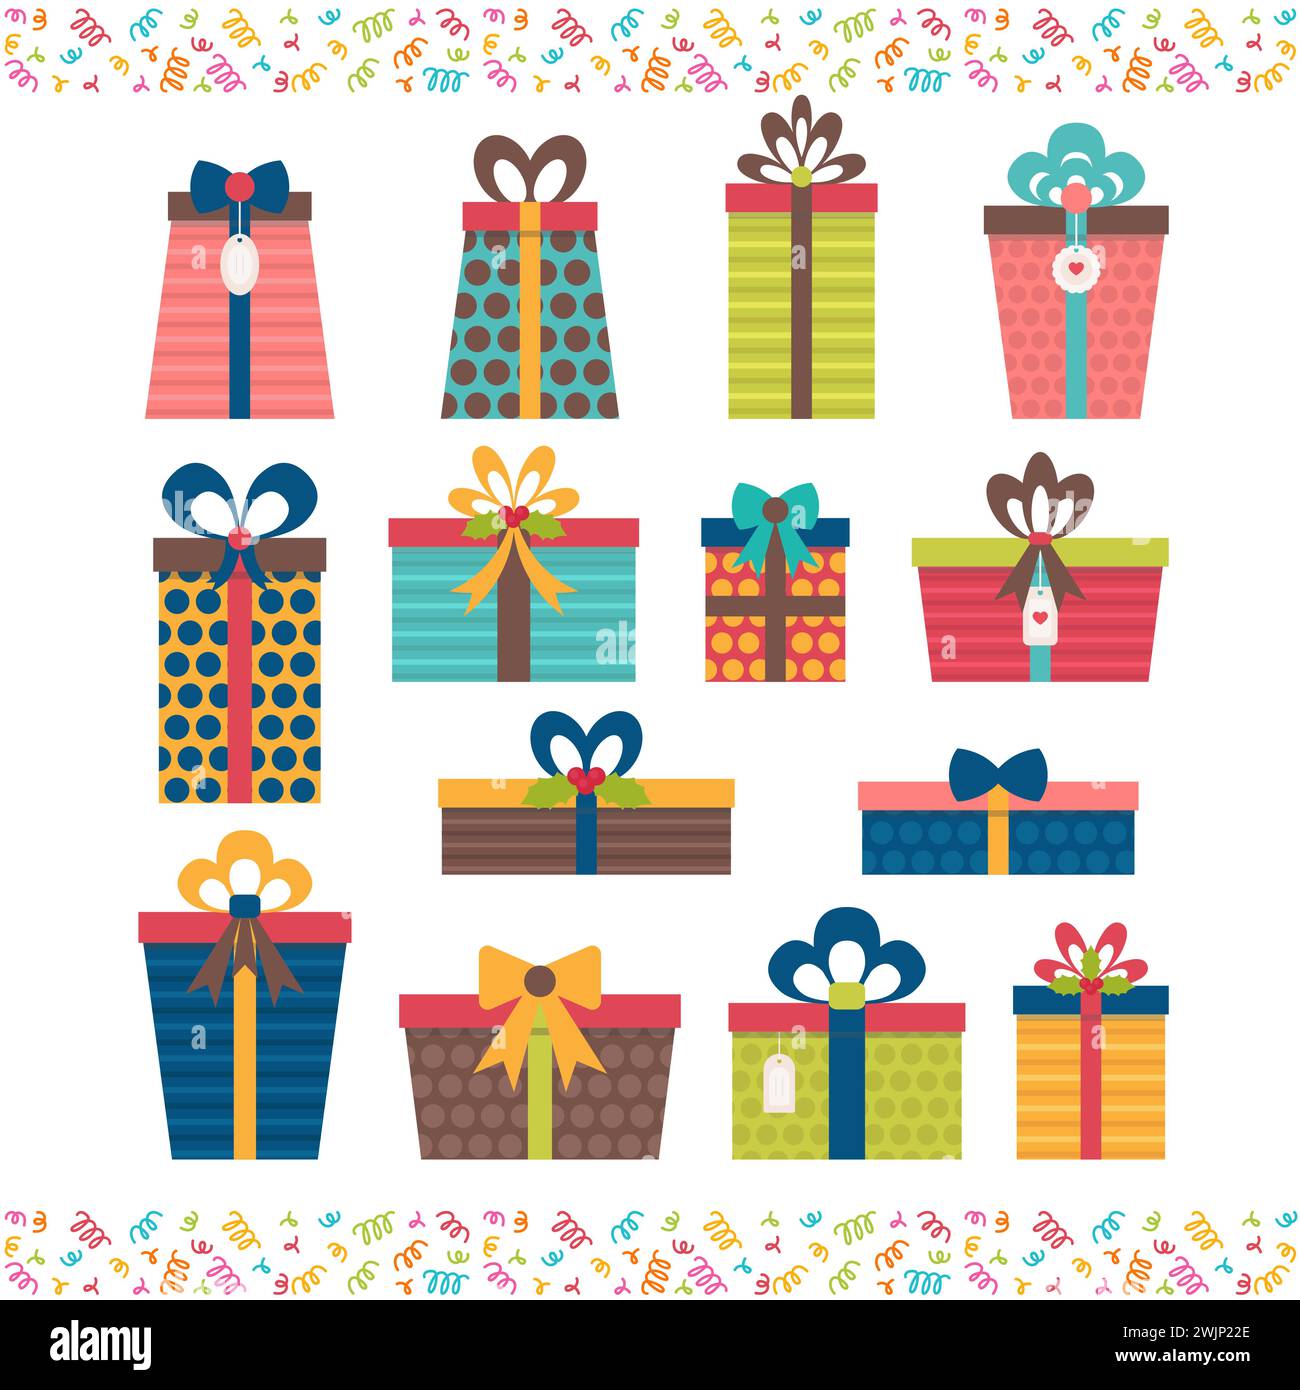 Set of different gift boxes. Flat design. Birthday surprise. Colorful wrapped gift boxes. Christmas presents. Vector illustration Stock Vector